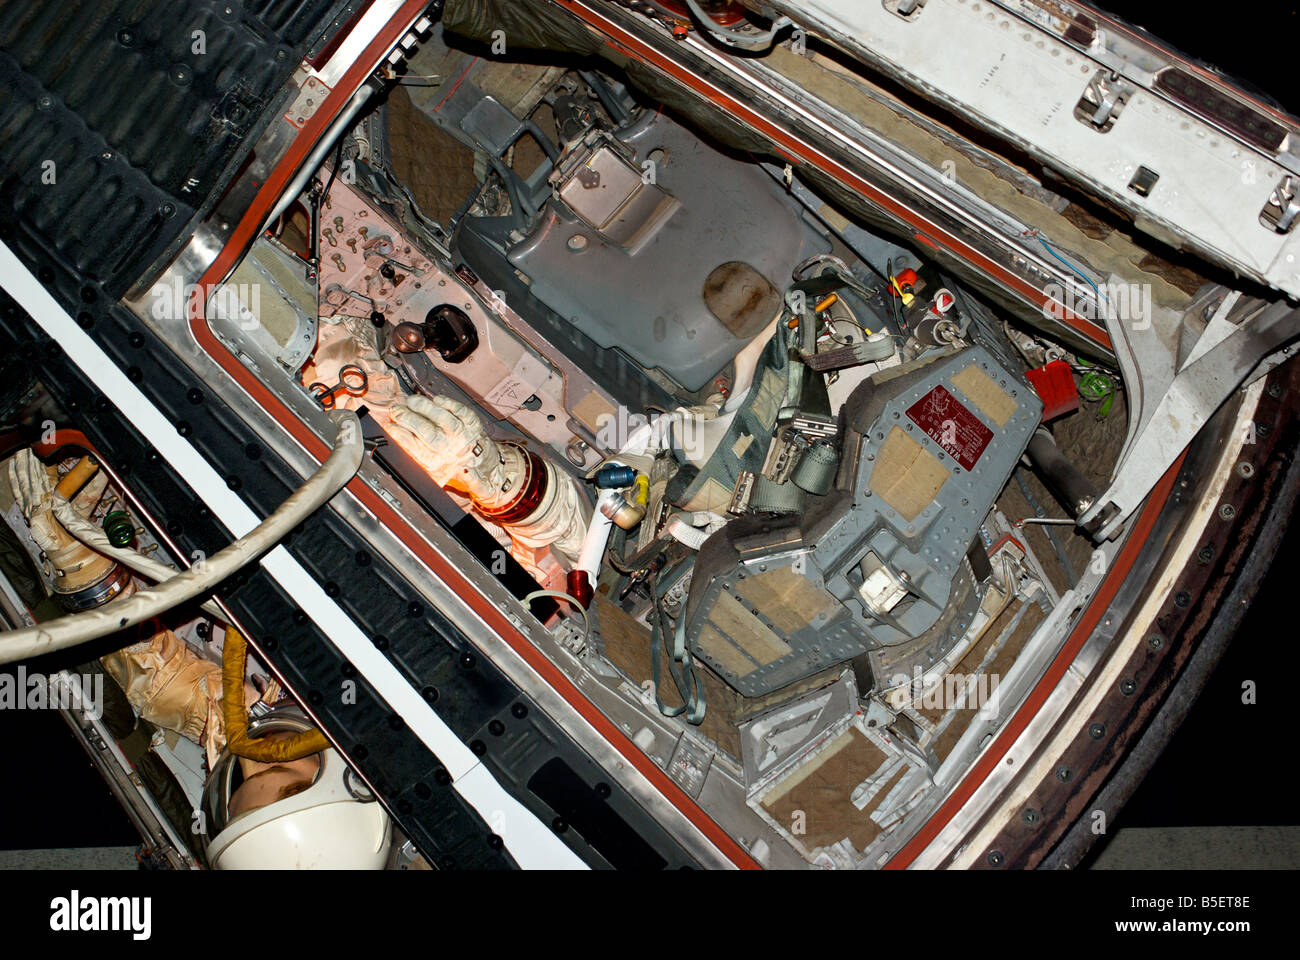 Tight confines for an astronaut in the mockup display of an space capsule from early space missions Stock Photo